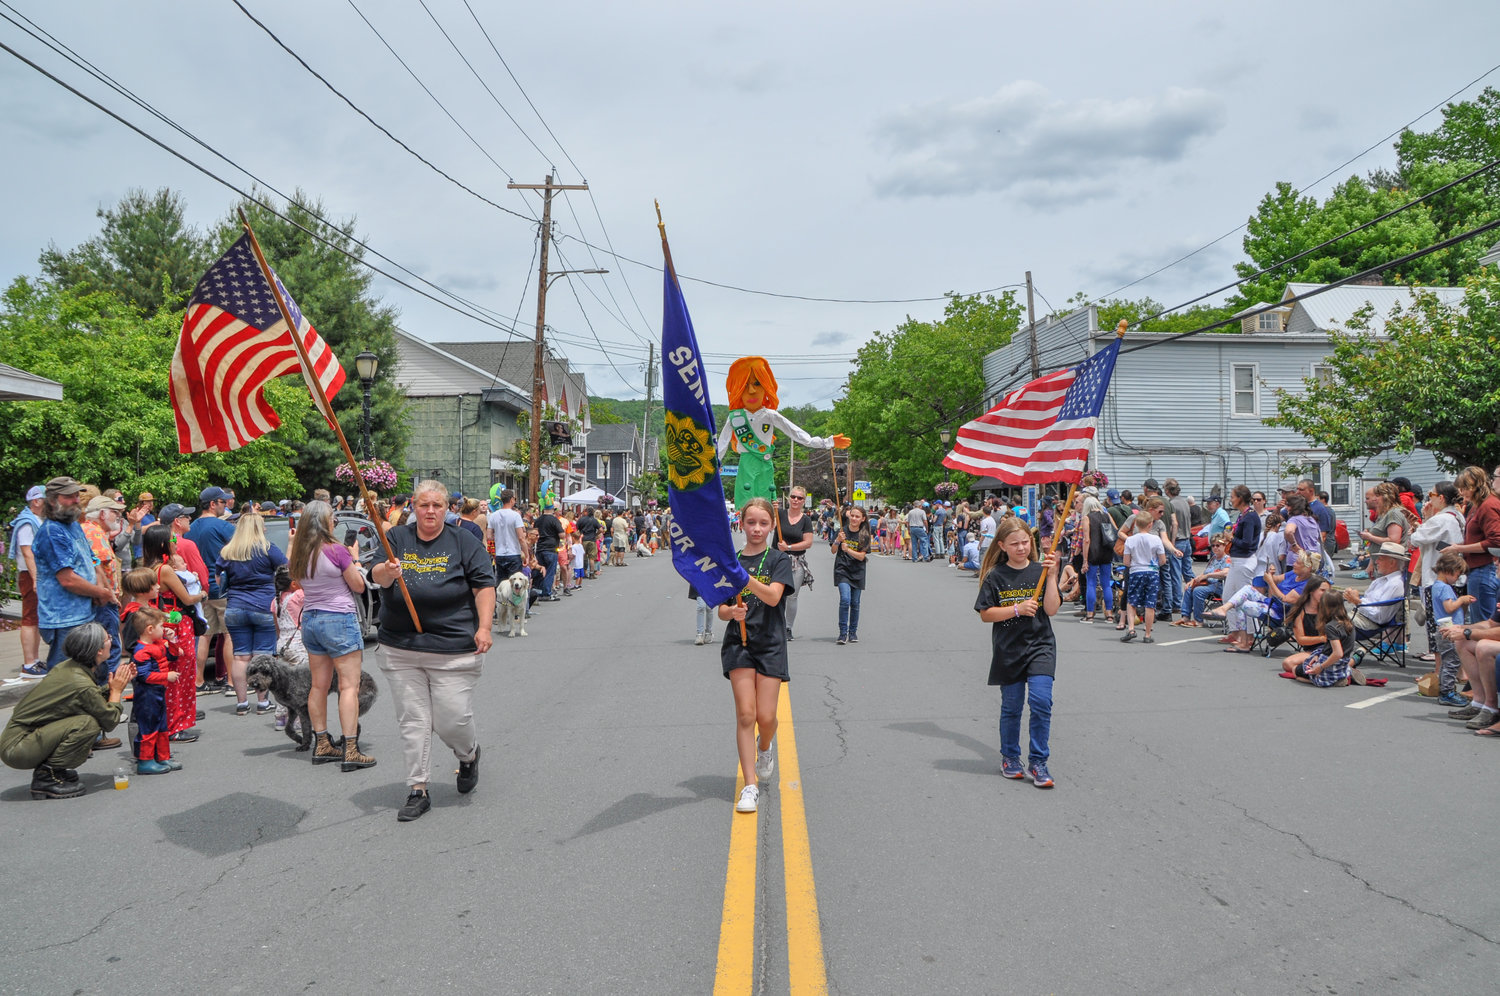 The local Girl Scout troop joined the ranks of giant puppets making their way down Main Street this year at the annual Livingston Manor Trout Parade. "Small Town, Big Back Yard."